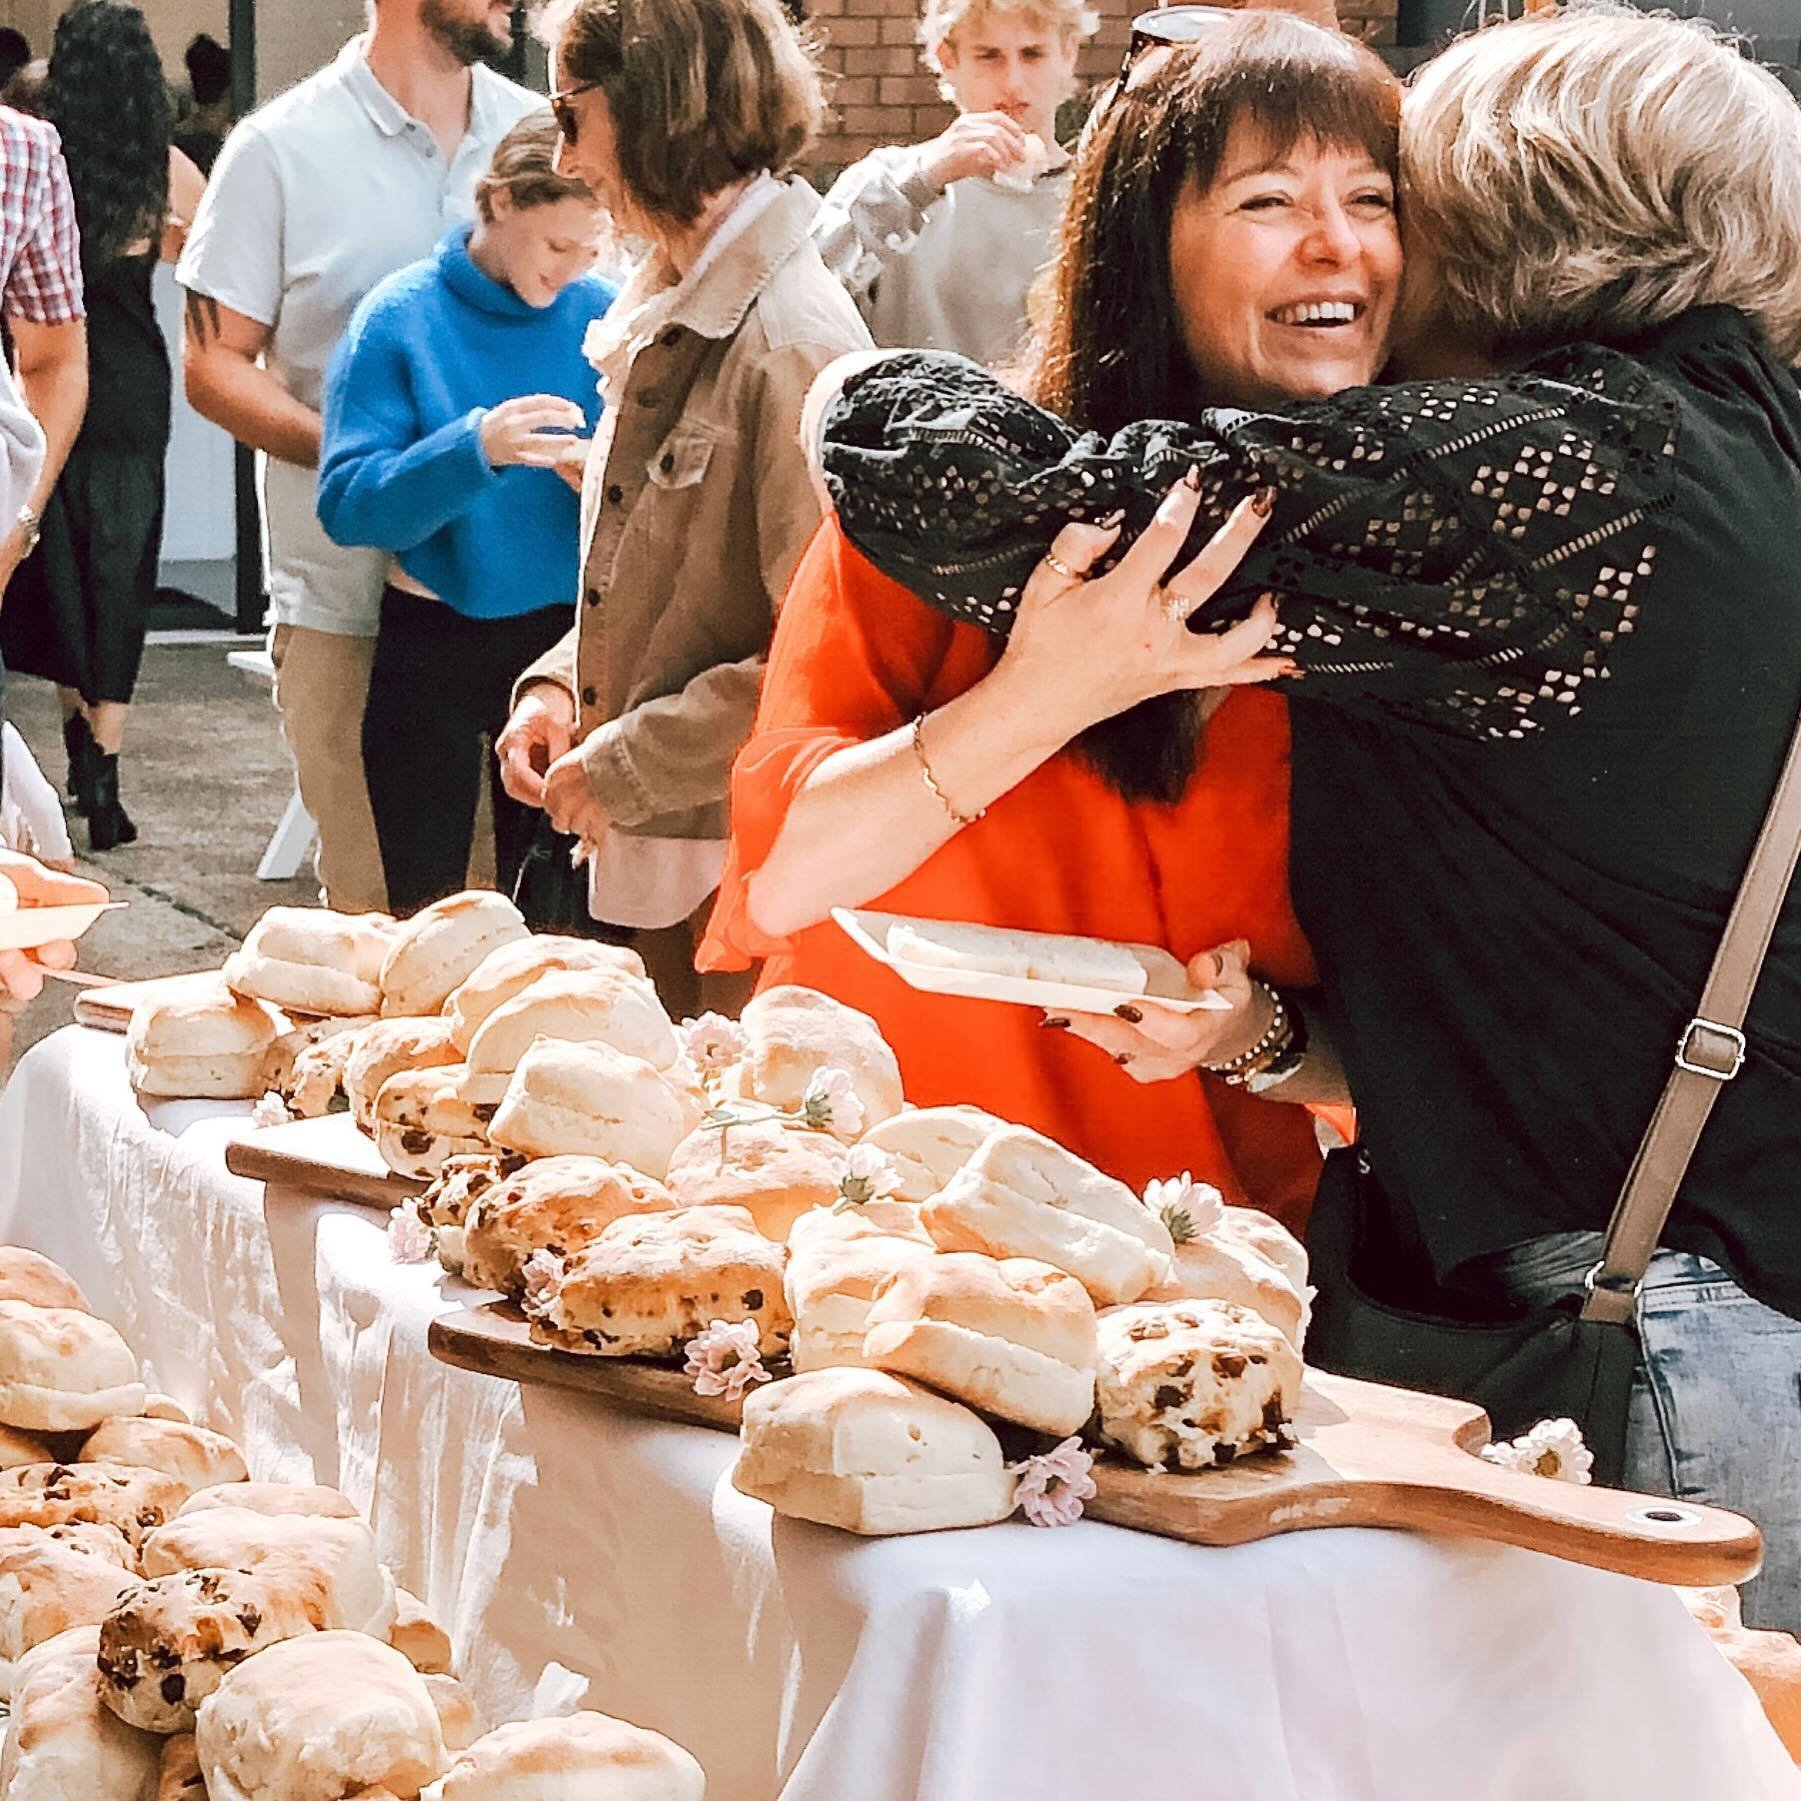 We can&rsquo;t wait to celebrate all our beautiful Mums this Sunday day!

Come along early for a photo with your loved ones and a sneaky coffee before the service. And stick around after for everyone&rsquo;s favourite&hellip;scones!

We can&rsquo;t w